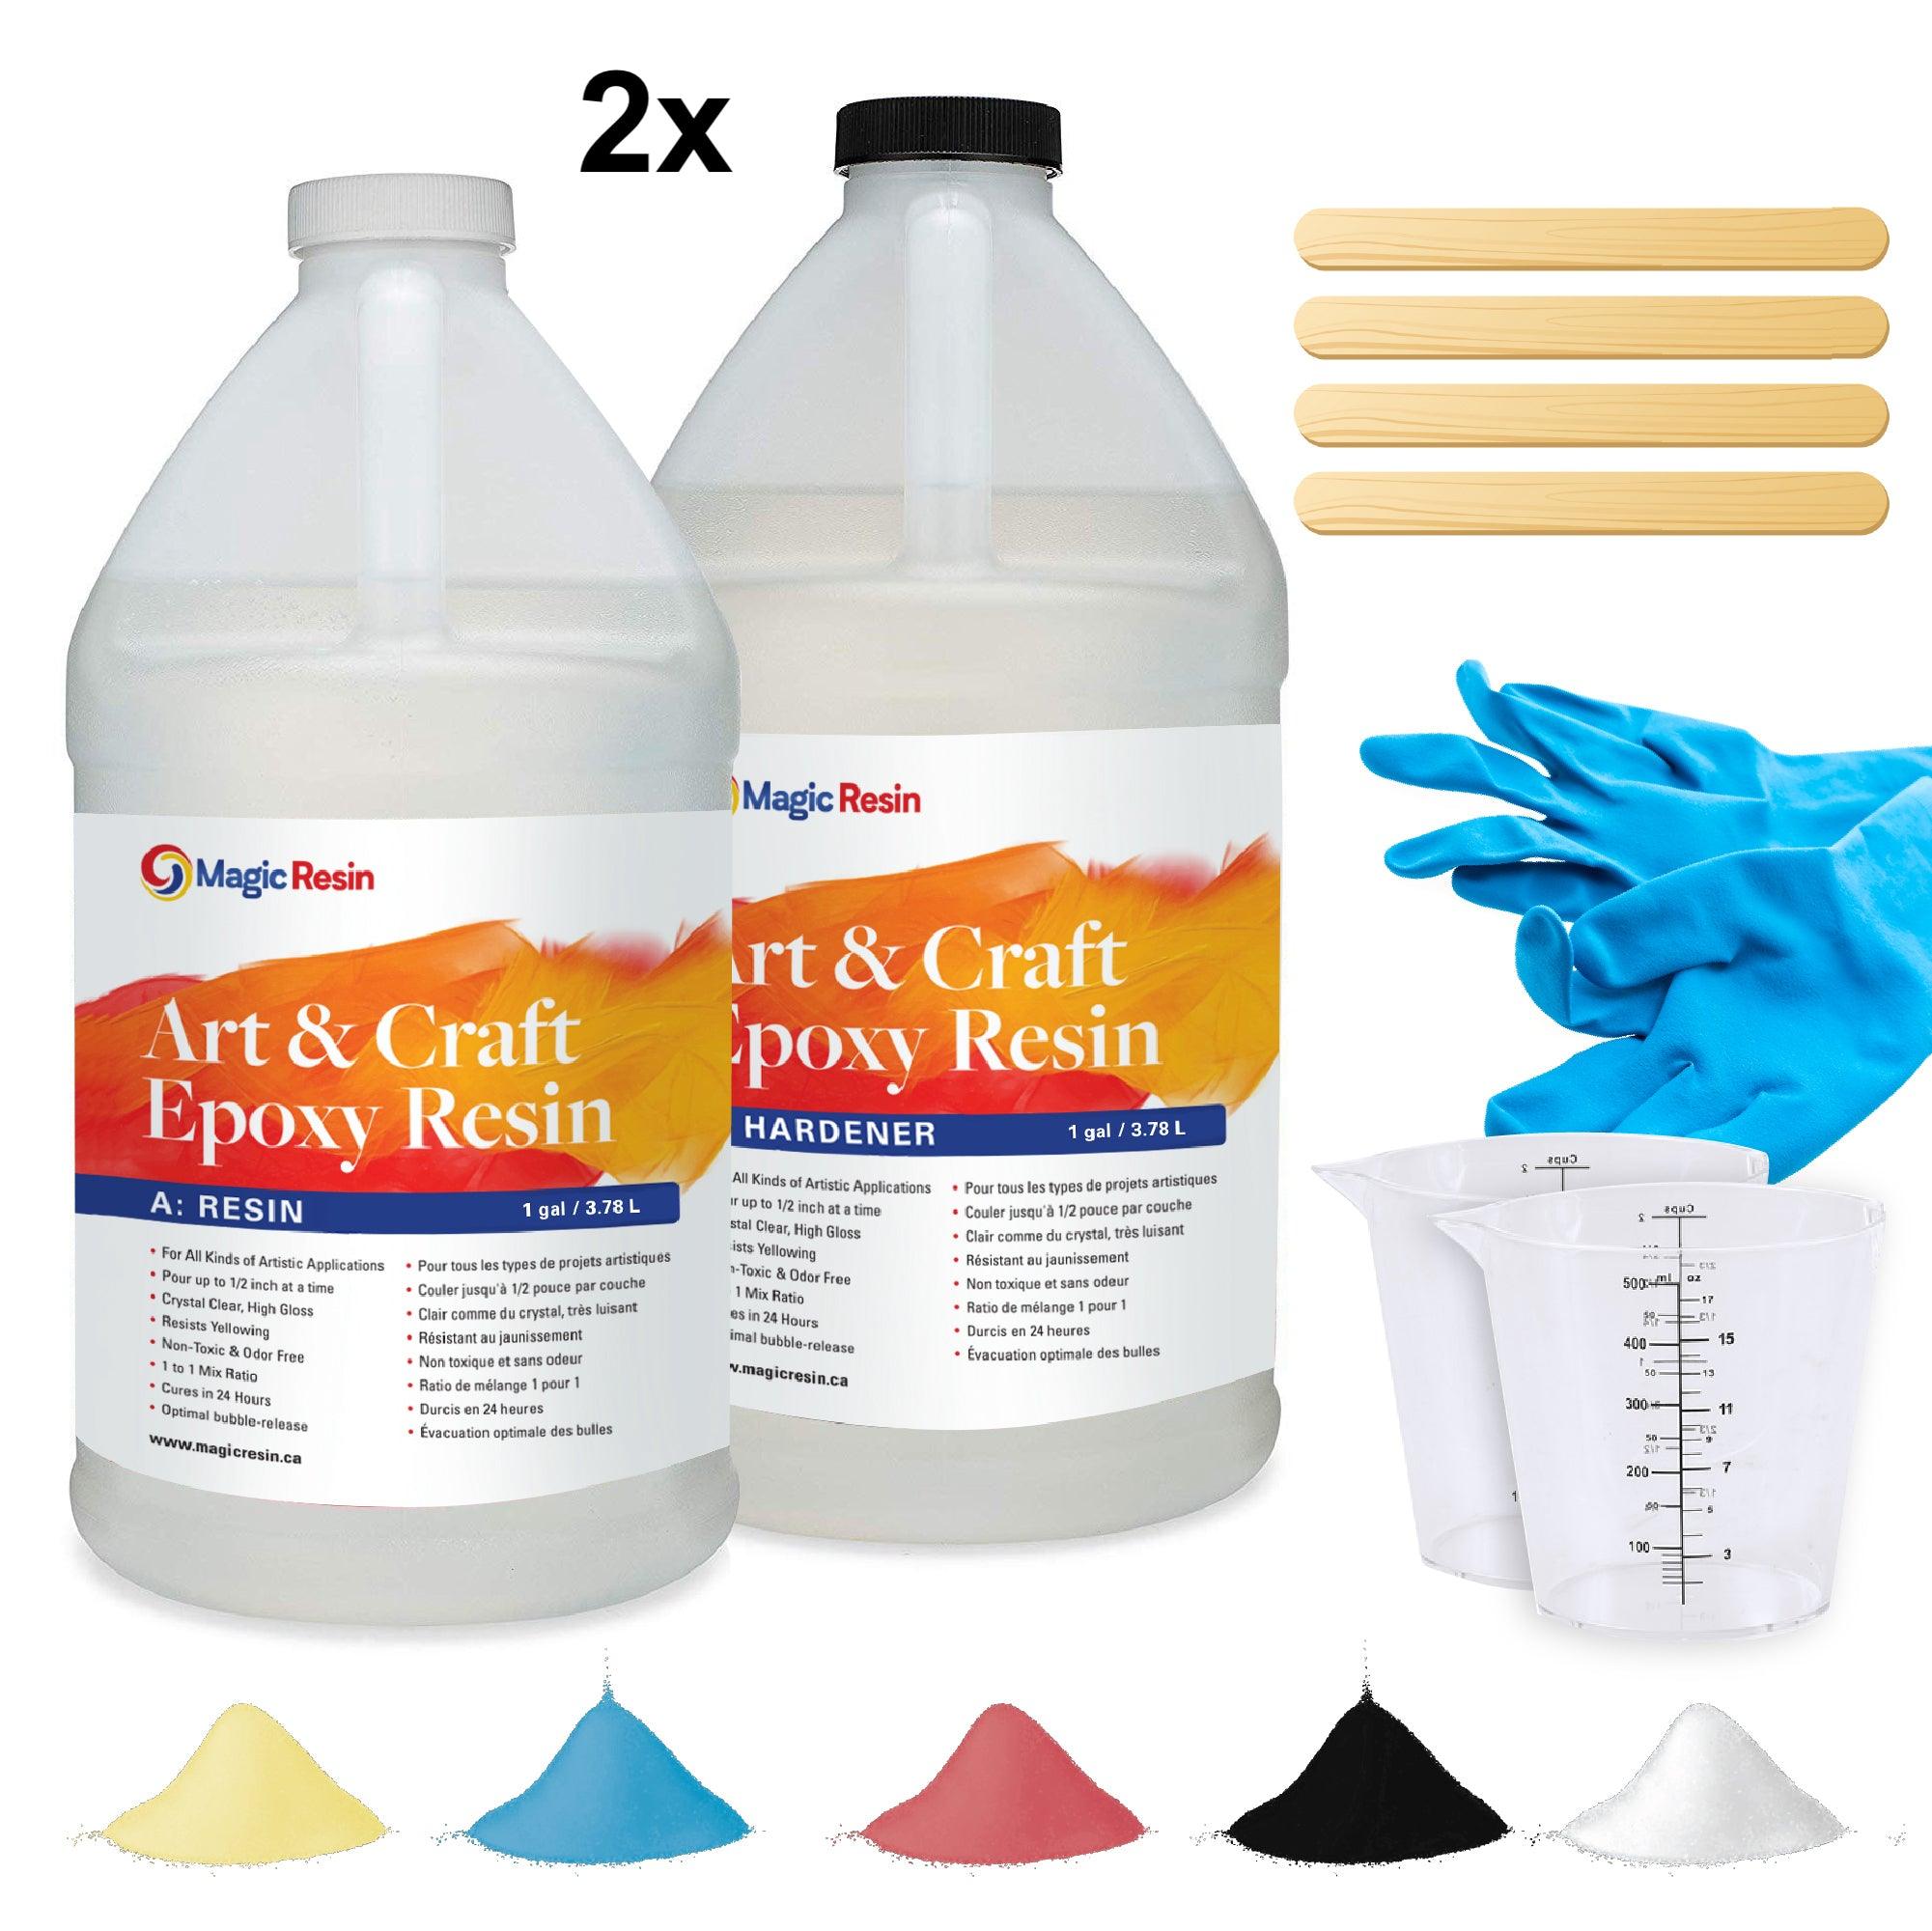 Deep Pour Epoxy Resin for River Table | 3/4 Gallon (2.85 L) | 4'' Deep Pour  & Casting Epoxy Resin Kit | Low VOC & Low Odor | for River Tables, Deep